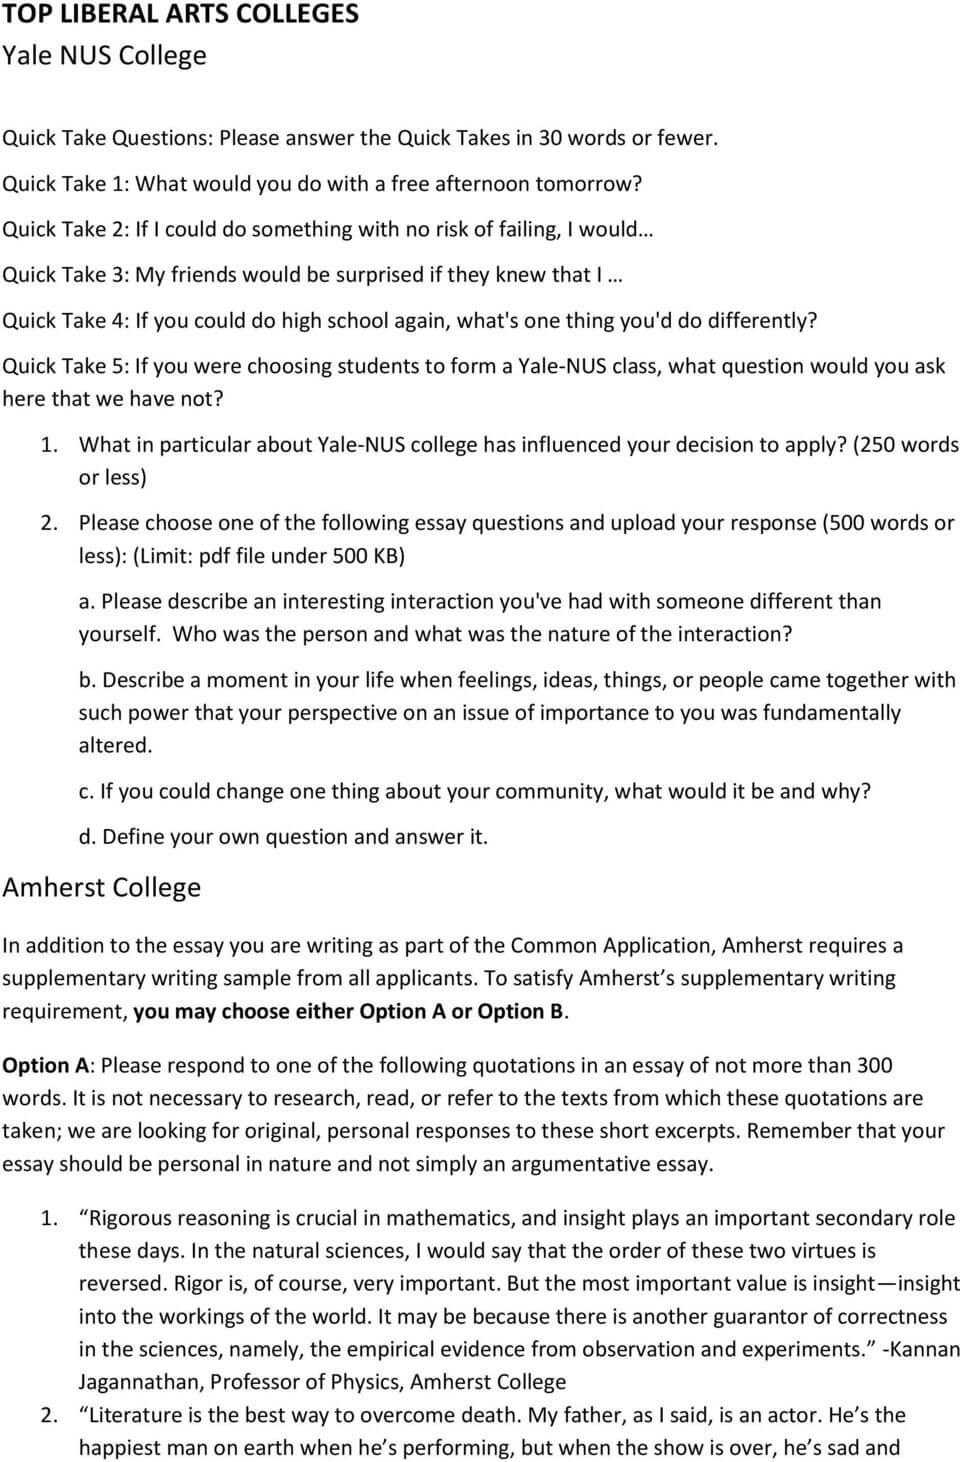 College Application Essay Examples Words Pdf Personal | Ceolpub Intended For 500 Word Essay Template